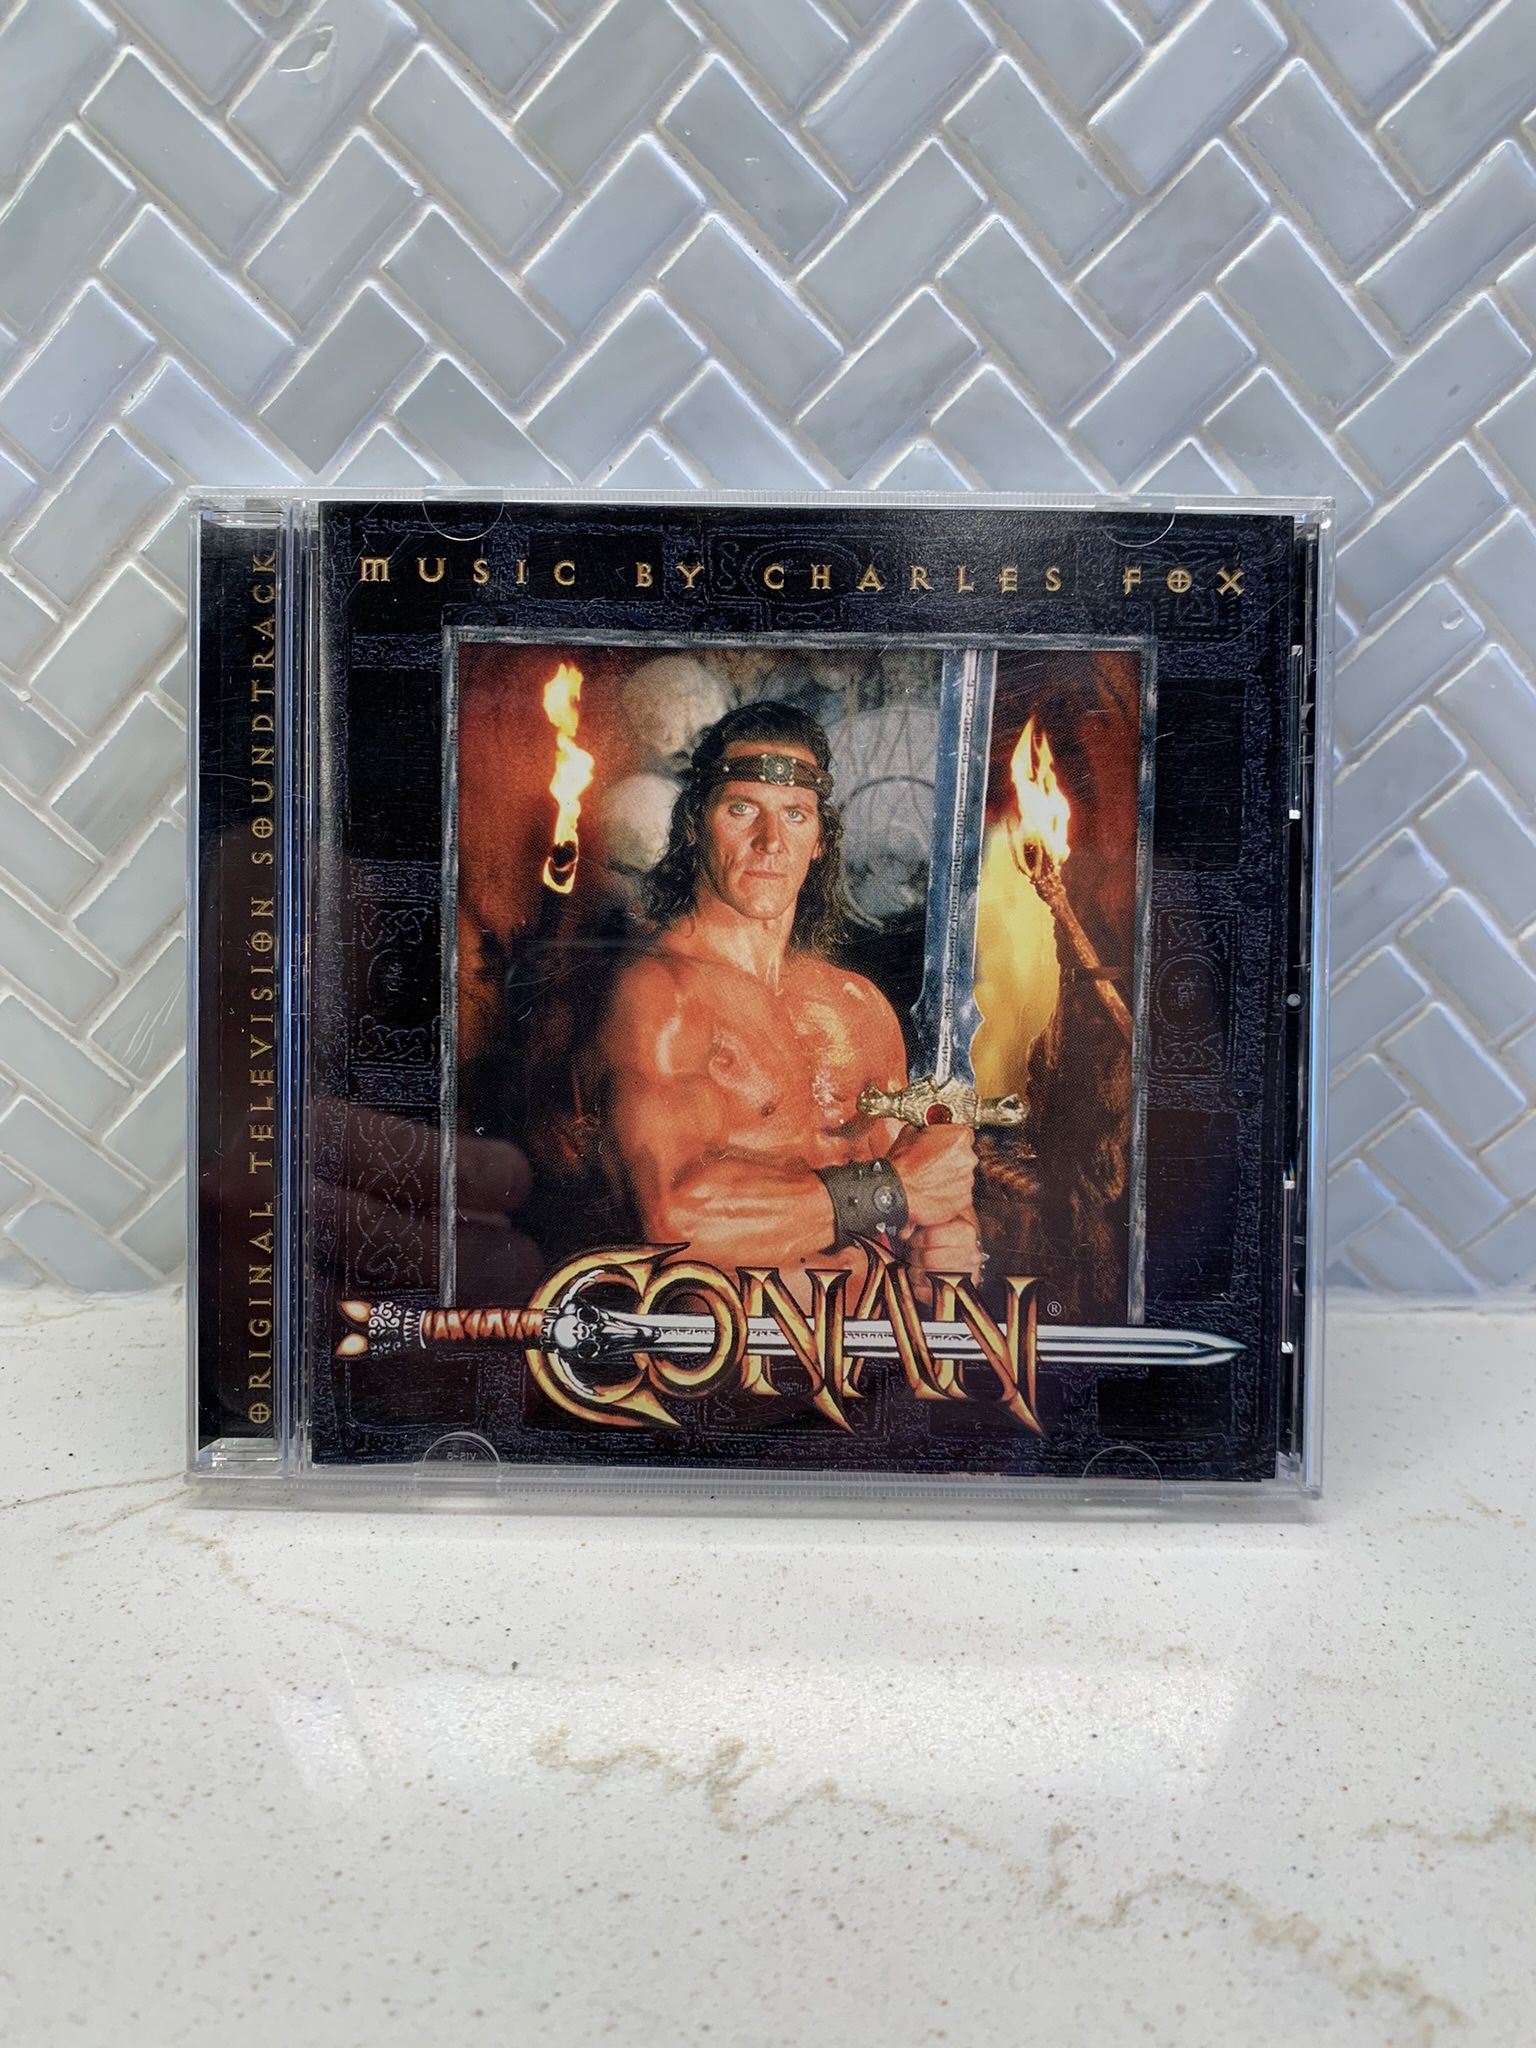 Conan: Music by Charles Fox Original Television Soundtrack OST CD 1998 Sonic LN